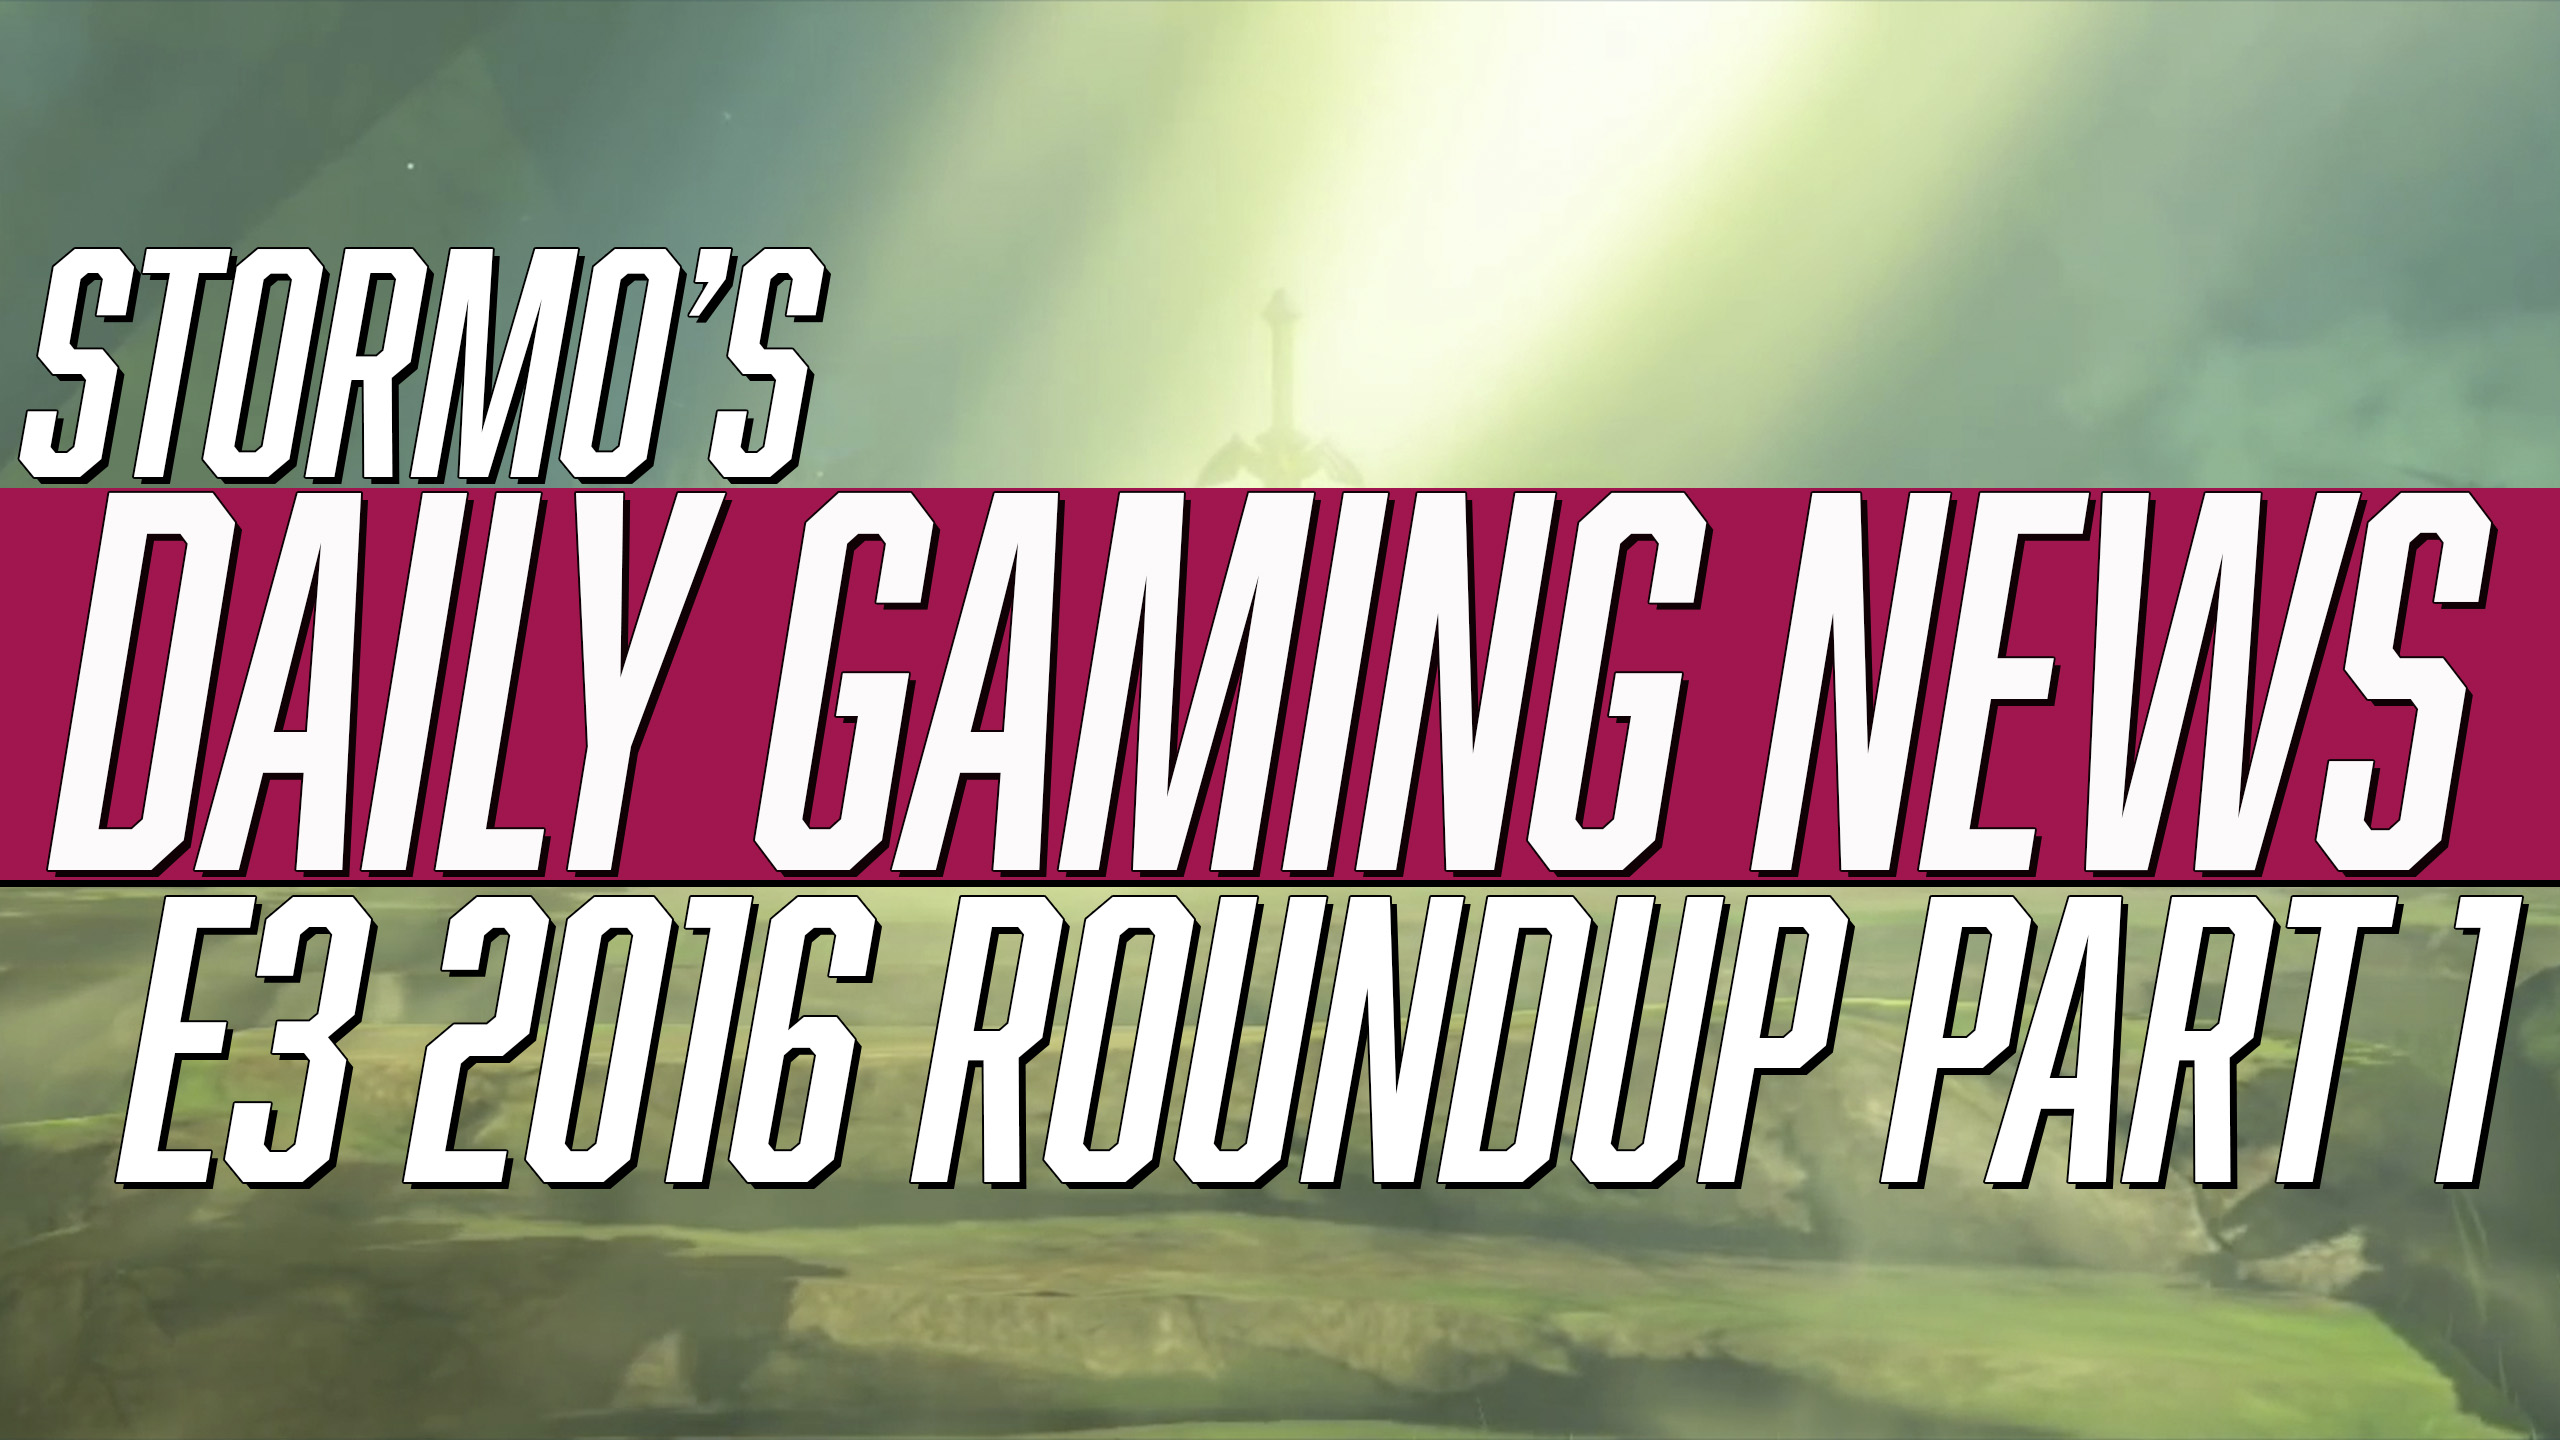 Daily Gaming News E3 2016 Roundup Part 1